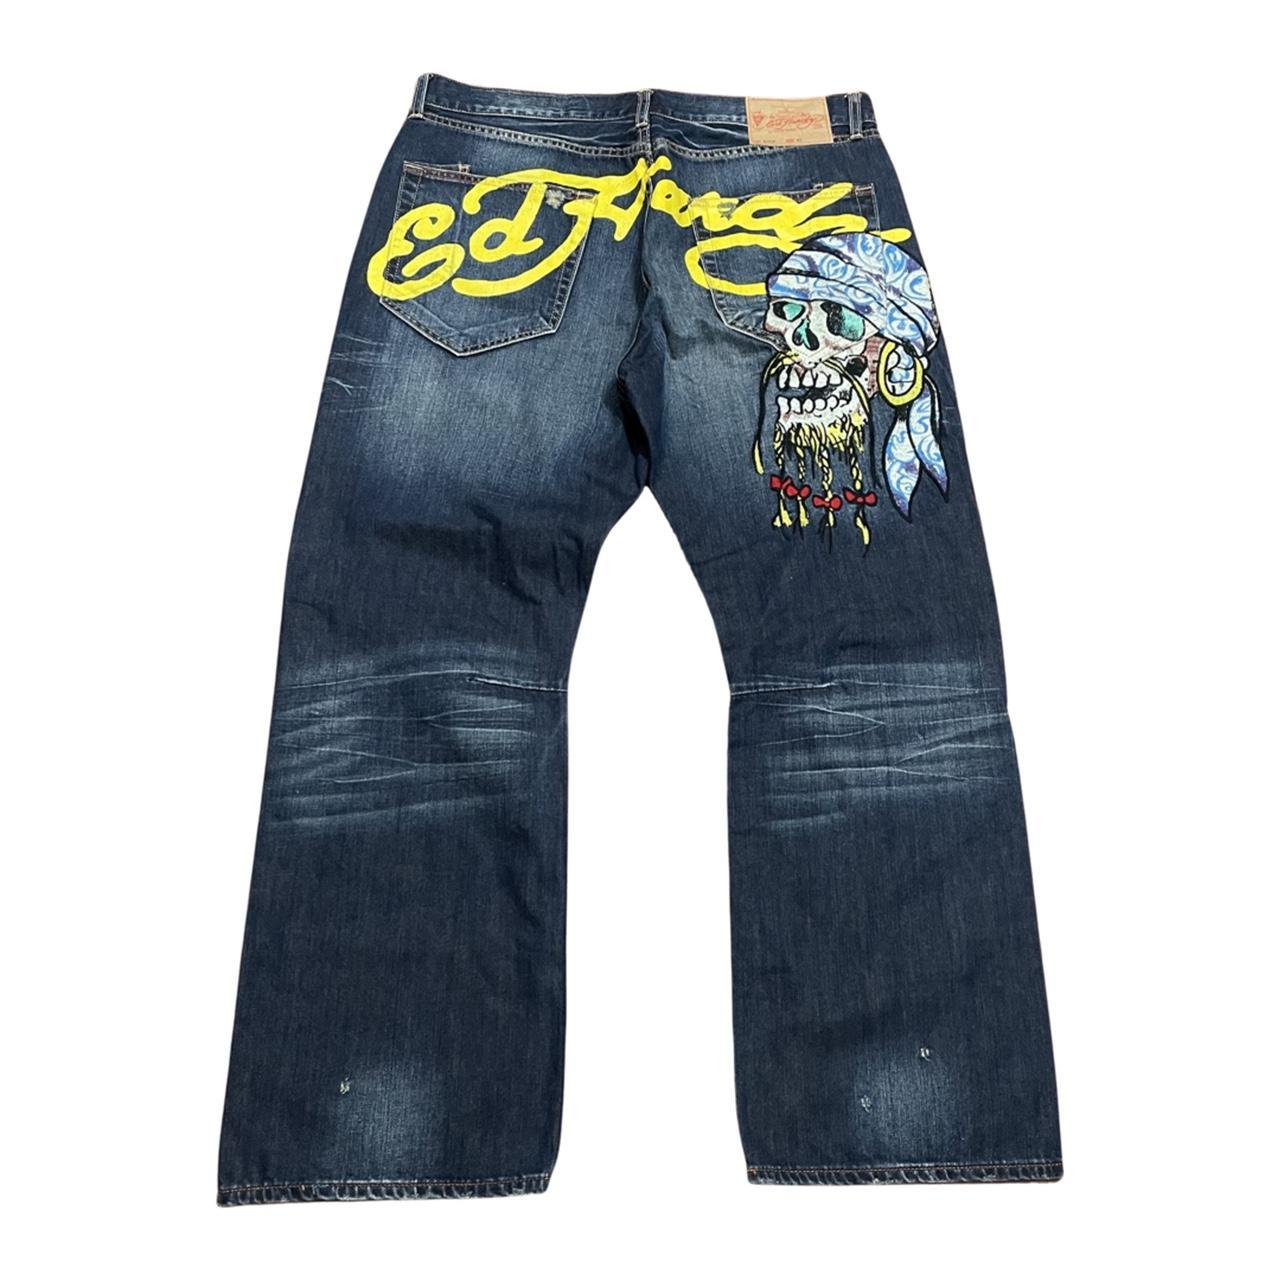 Ed Hardy Men’s Jeans Embroidered McQueen Pirate... - Depop